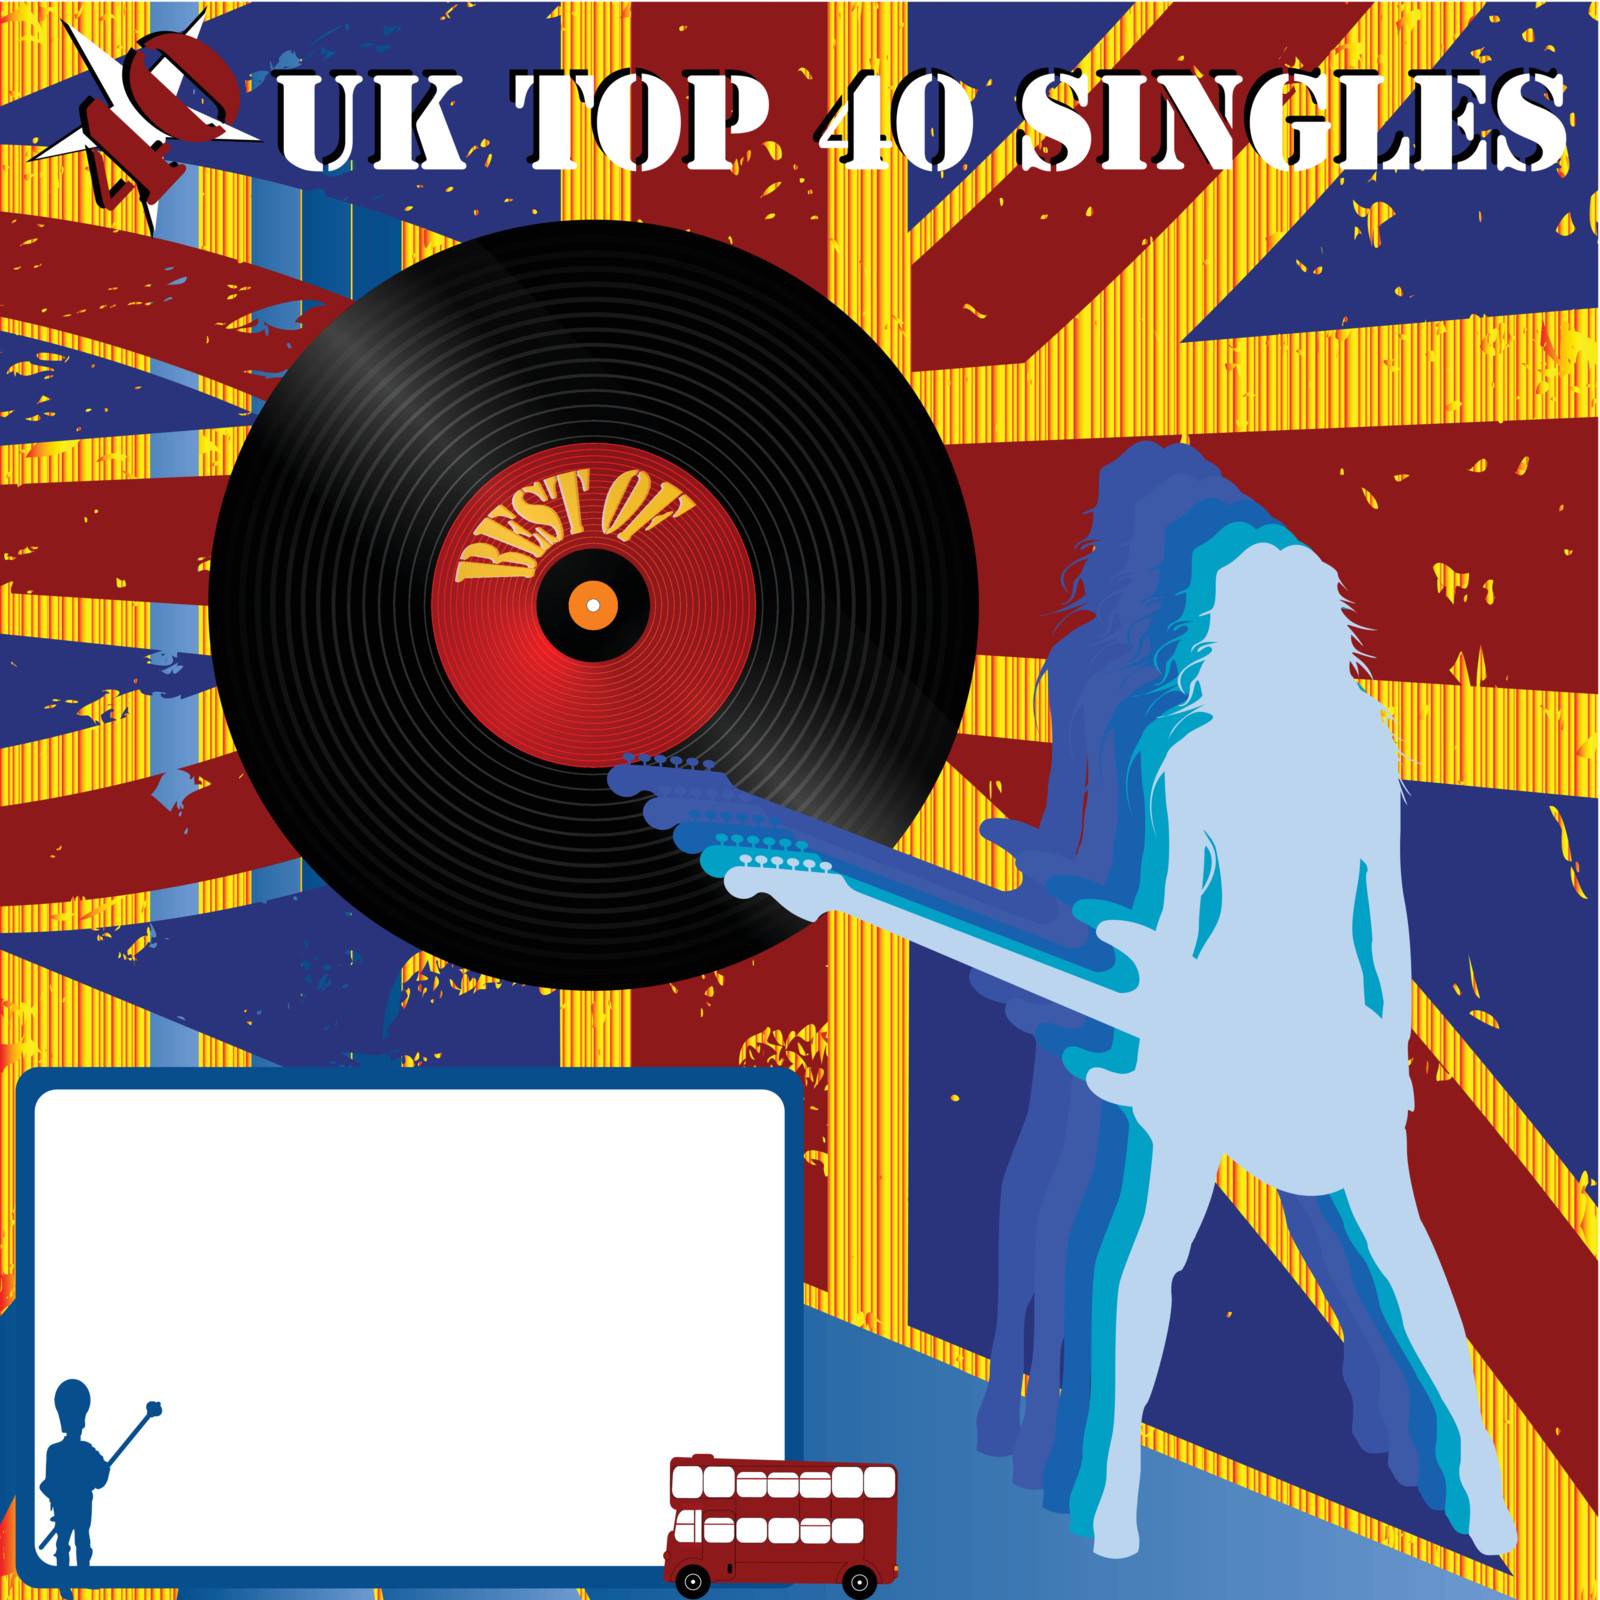 Top 40 singles UK poster with room for your text